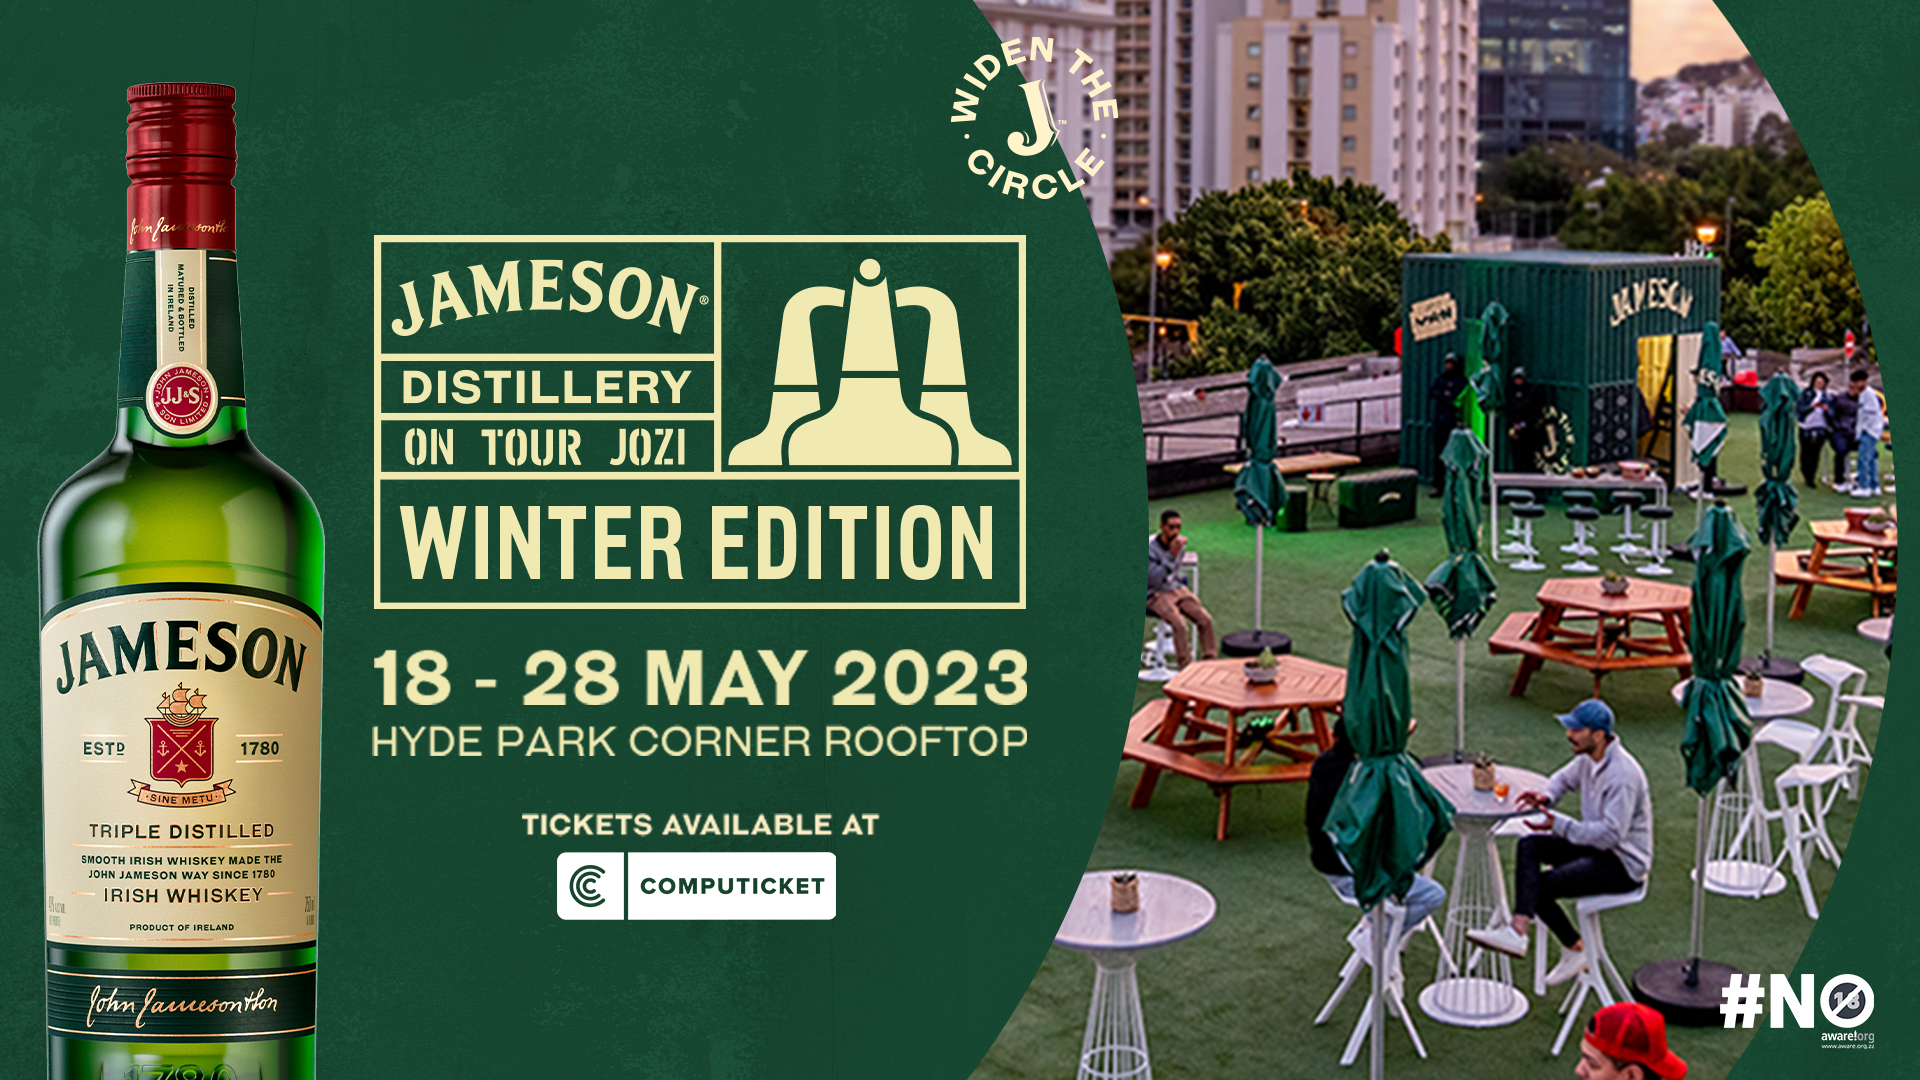 jameson distillery on tour south africa 2023